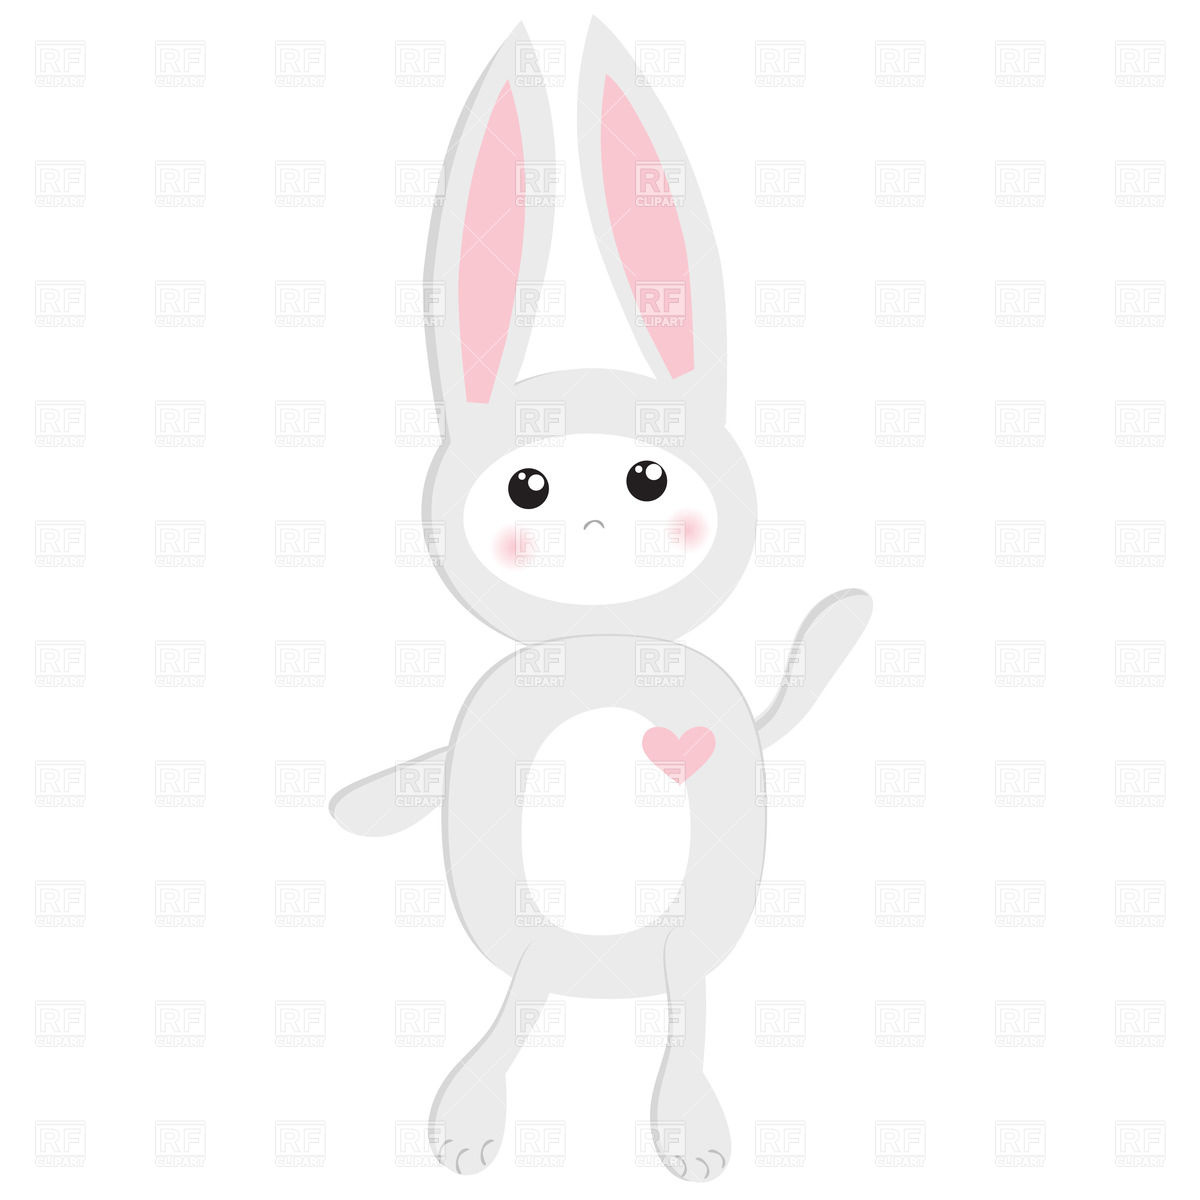 Cute Easter Bunny 22331 Download Royalty Free Vector Clipart  Eps